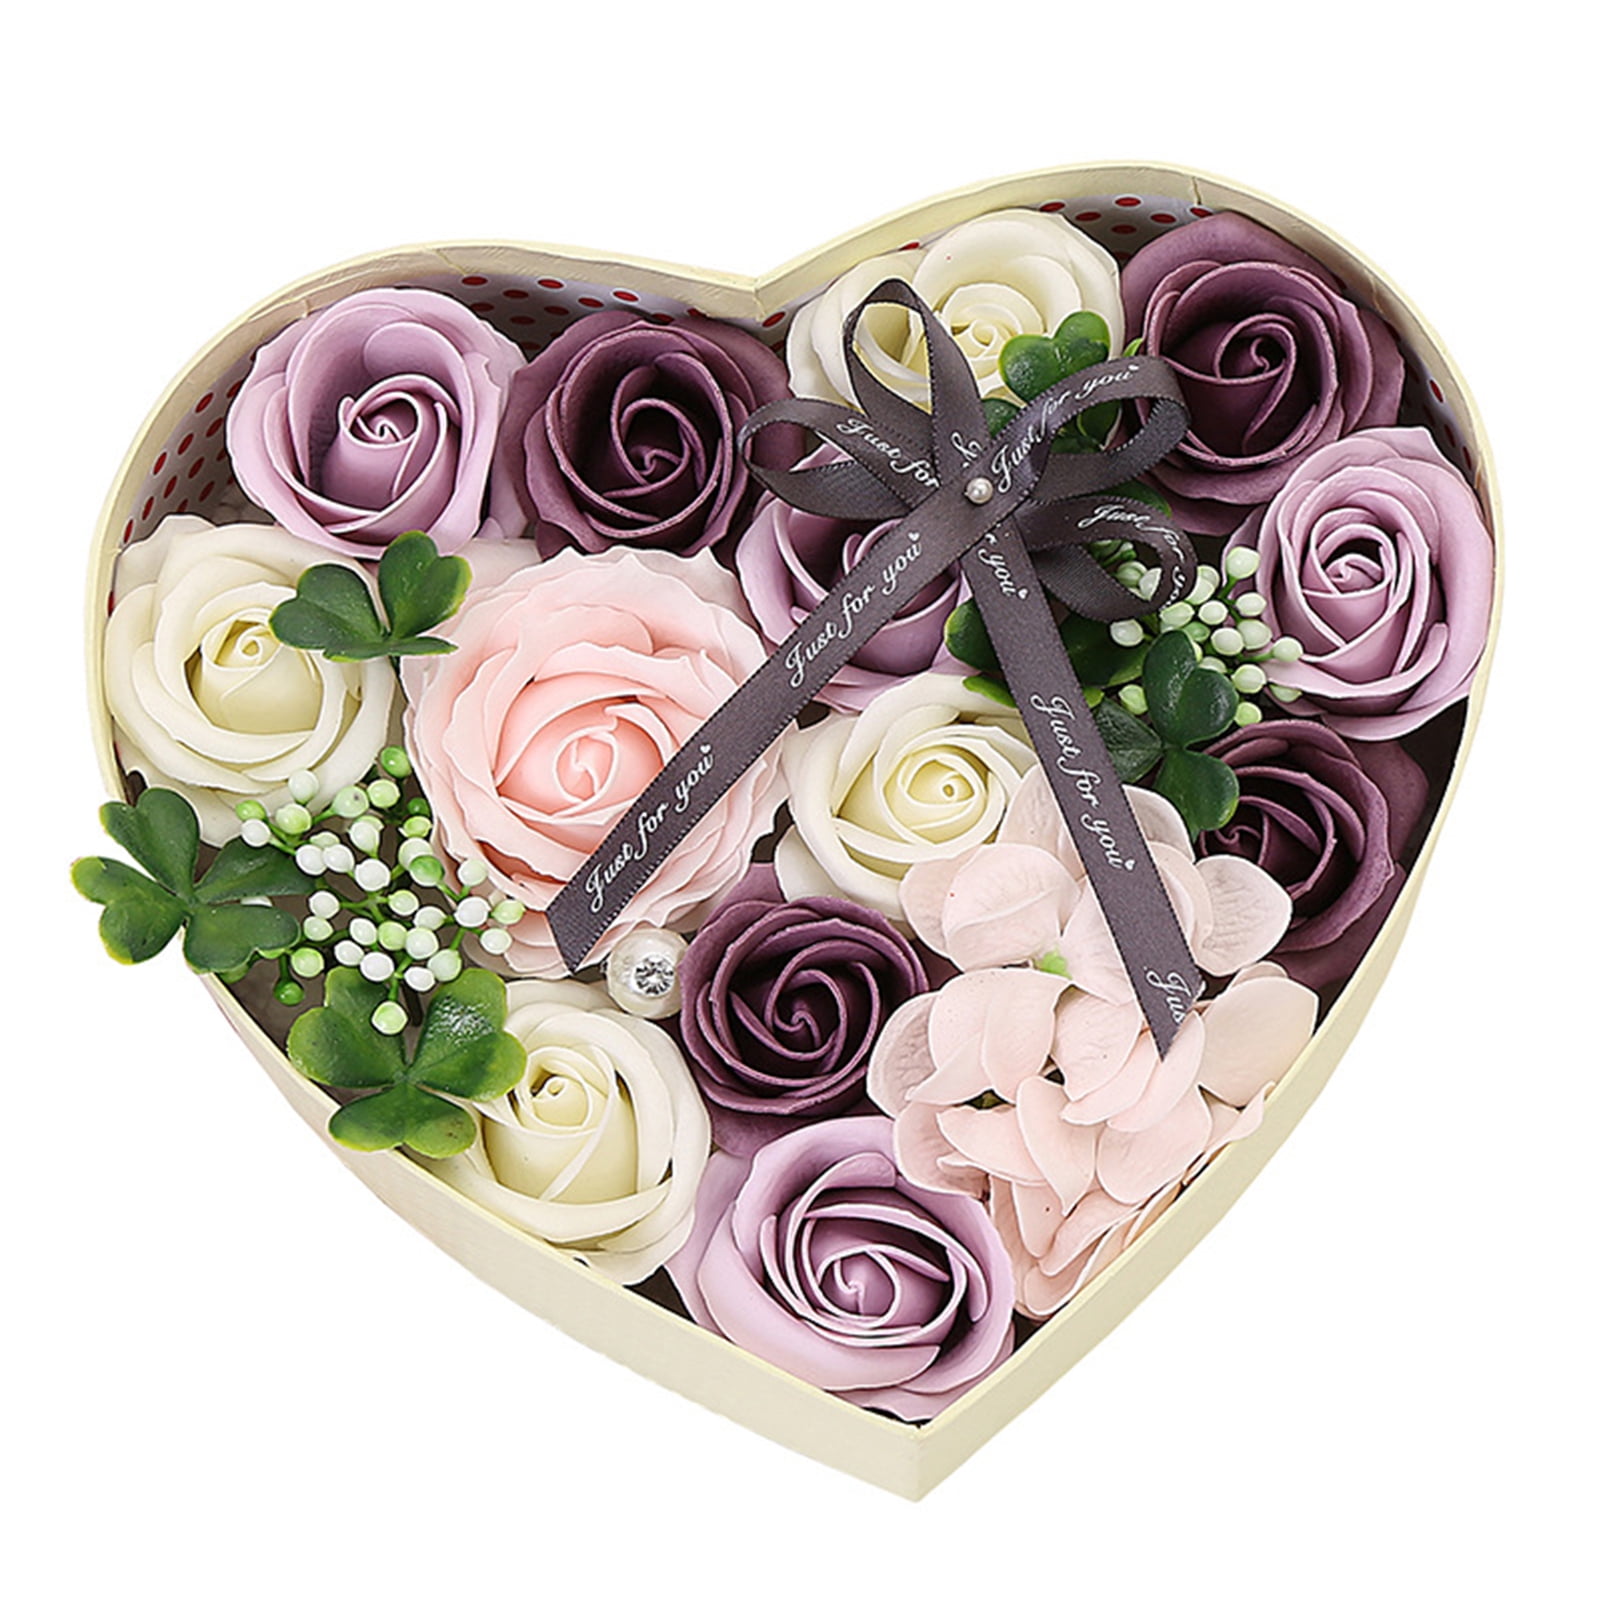  Abaodam Boxes Heart Shaped Flower Box Bouquets Florist Gift  Heart Present Container Heart Design Memorial Gifts Romantic Gifts Rose  Gift 1550g Cardboard Chocolate Jewelry Box: Home & Kitchen